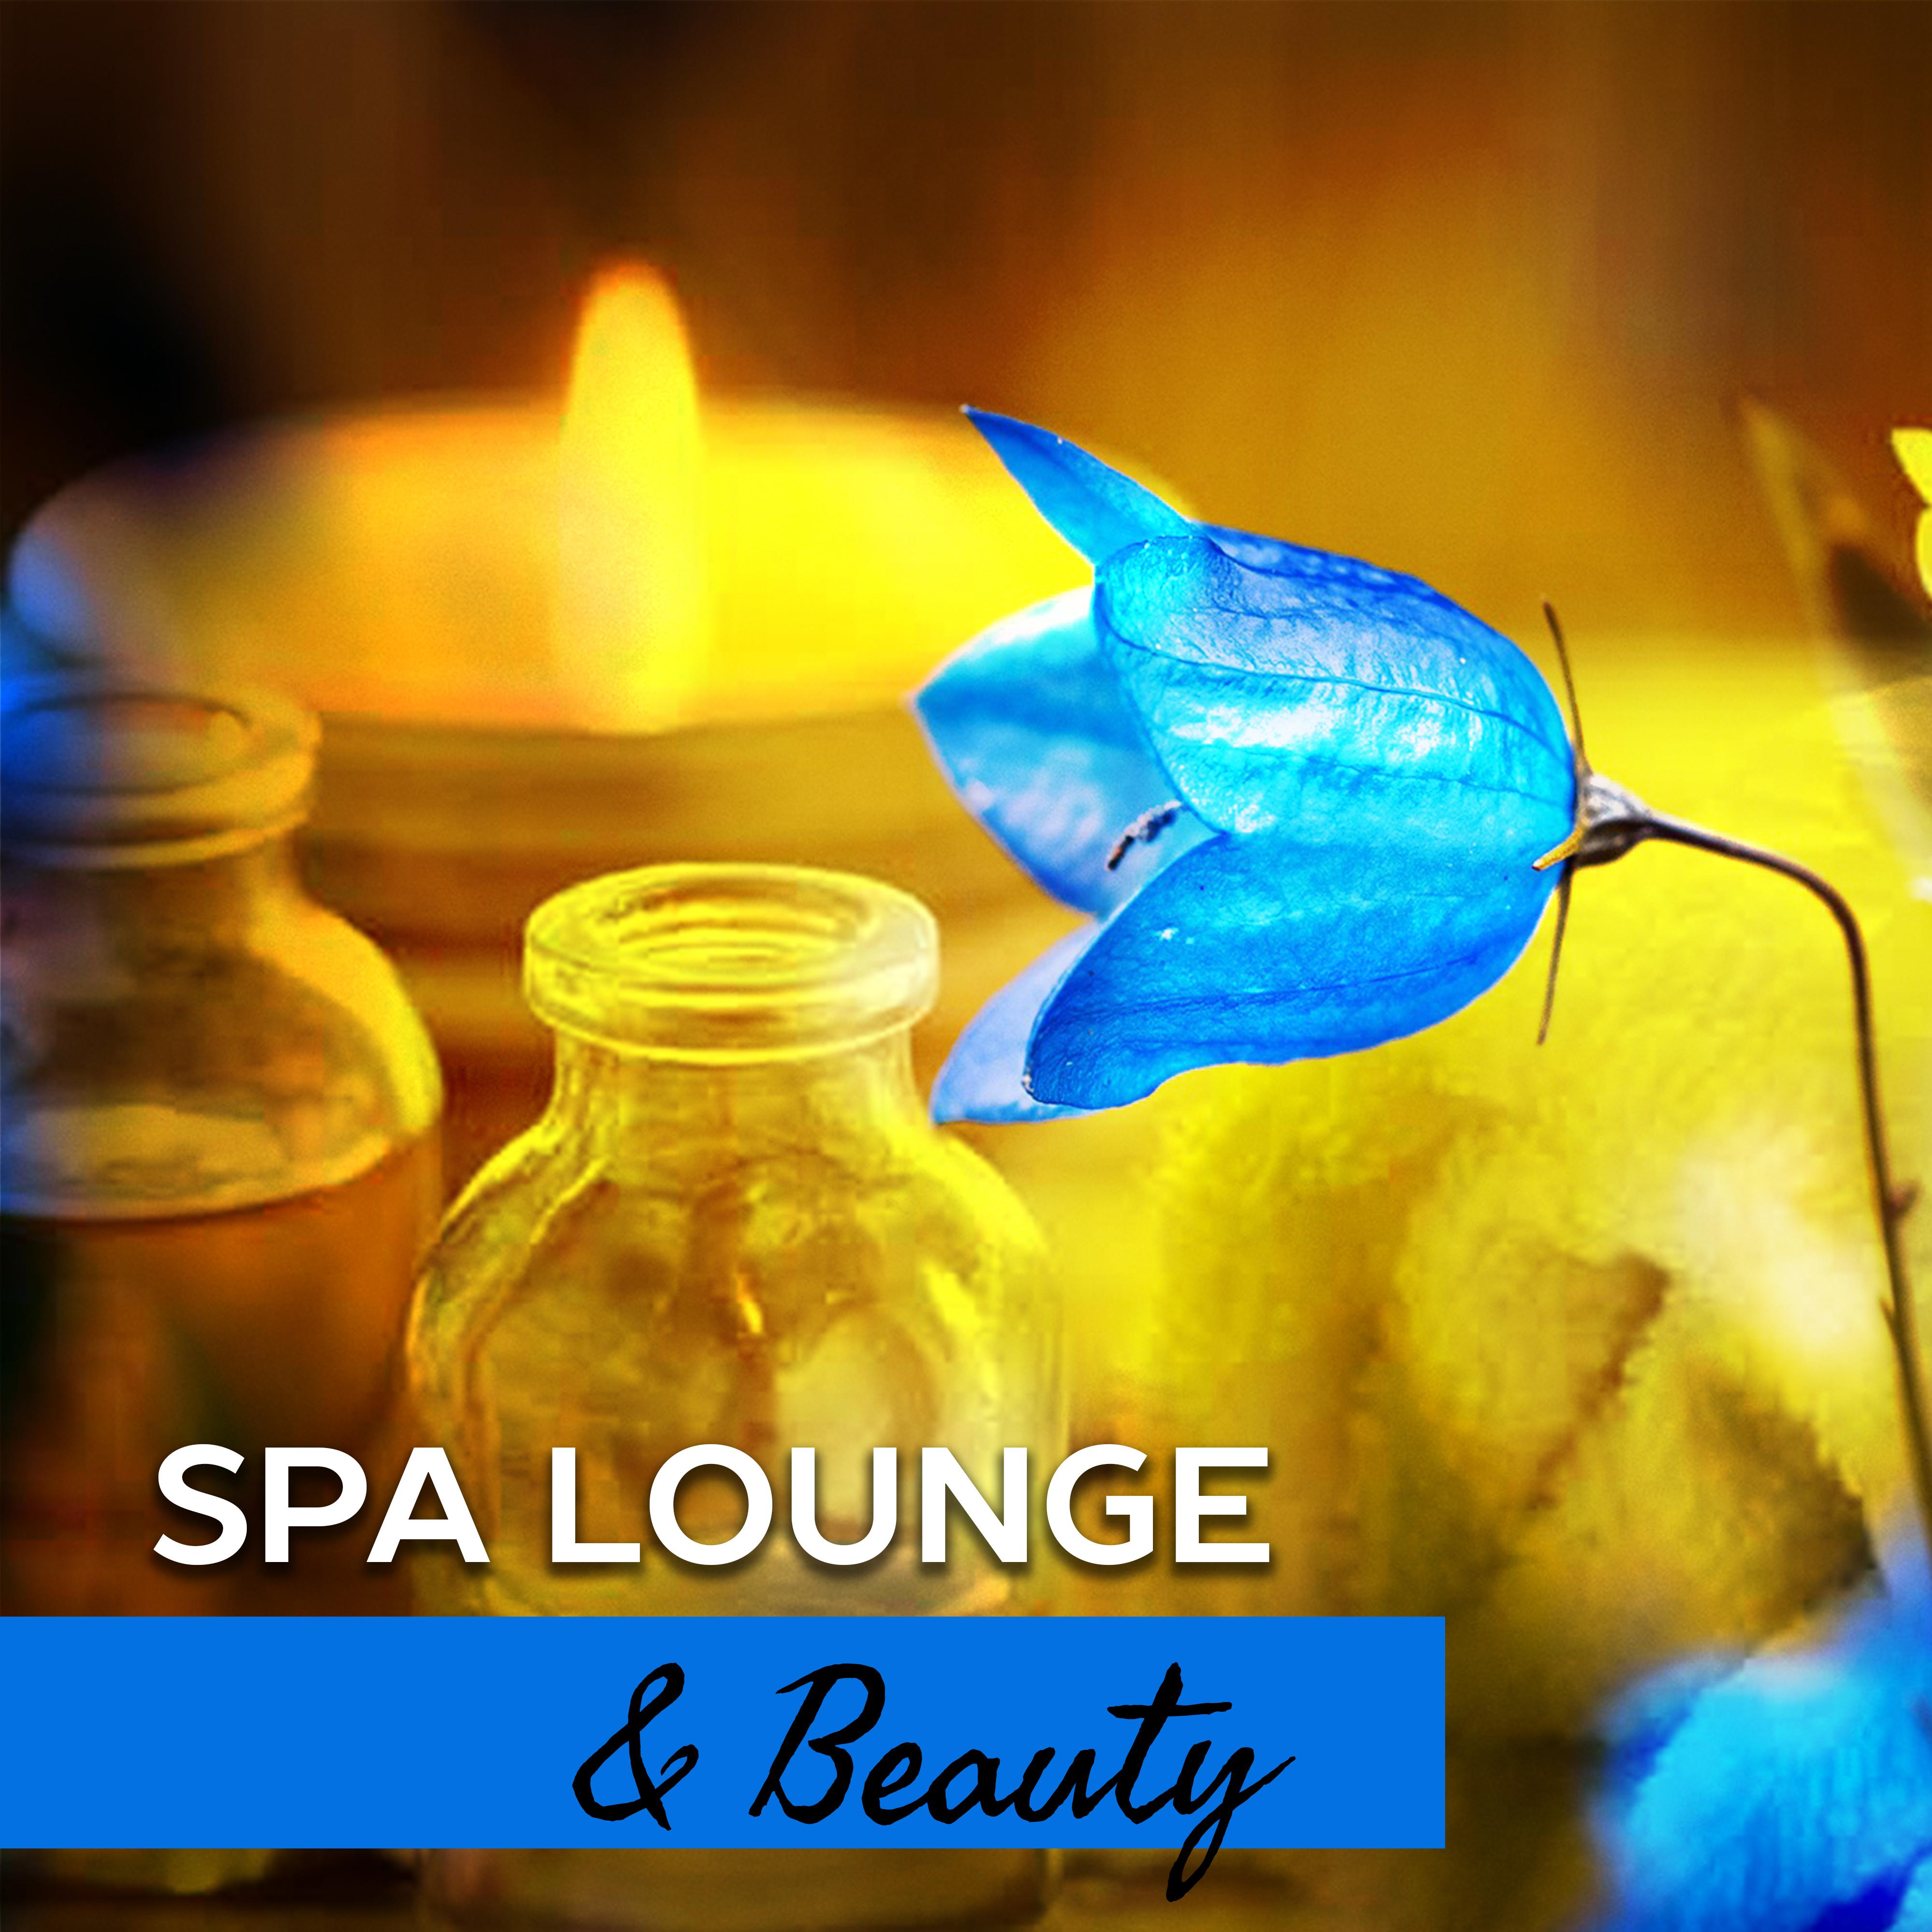 Spa Lounge  Beauty  Relaxing New Age, Music for Spa  Wellness Resort, Massage Background, Relaxed Body  Mind